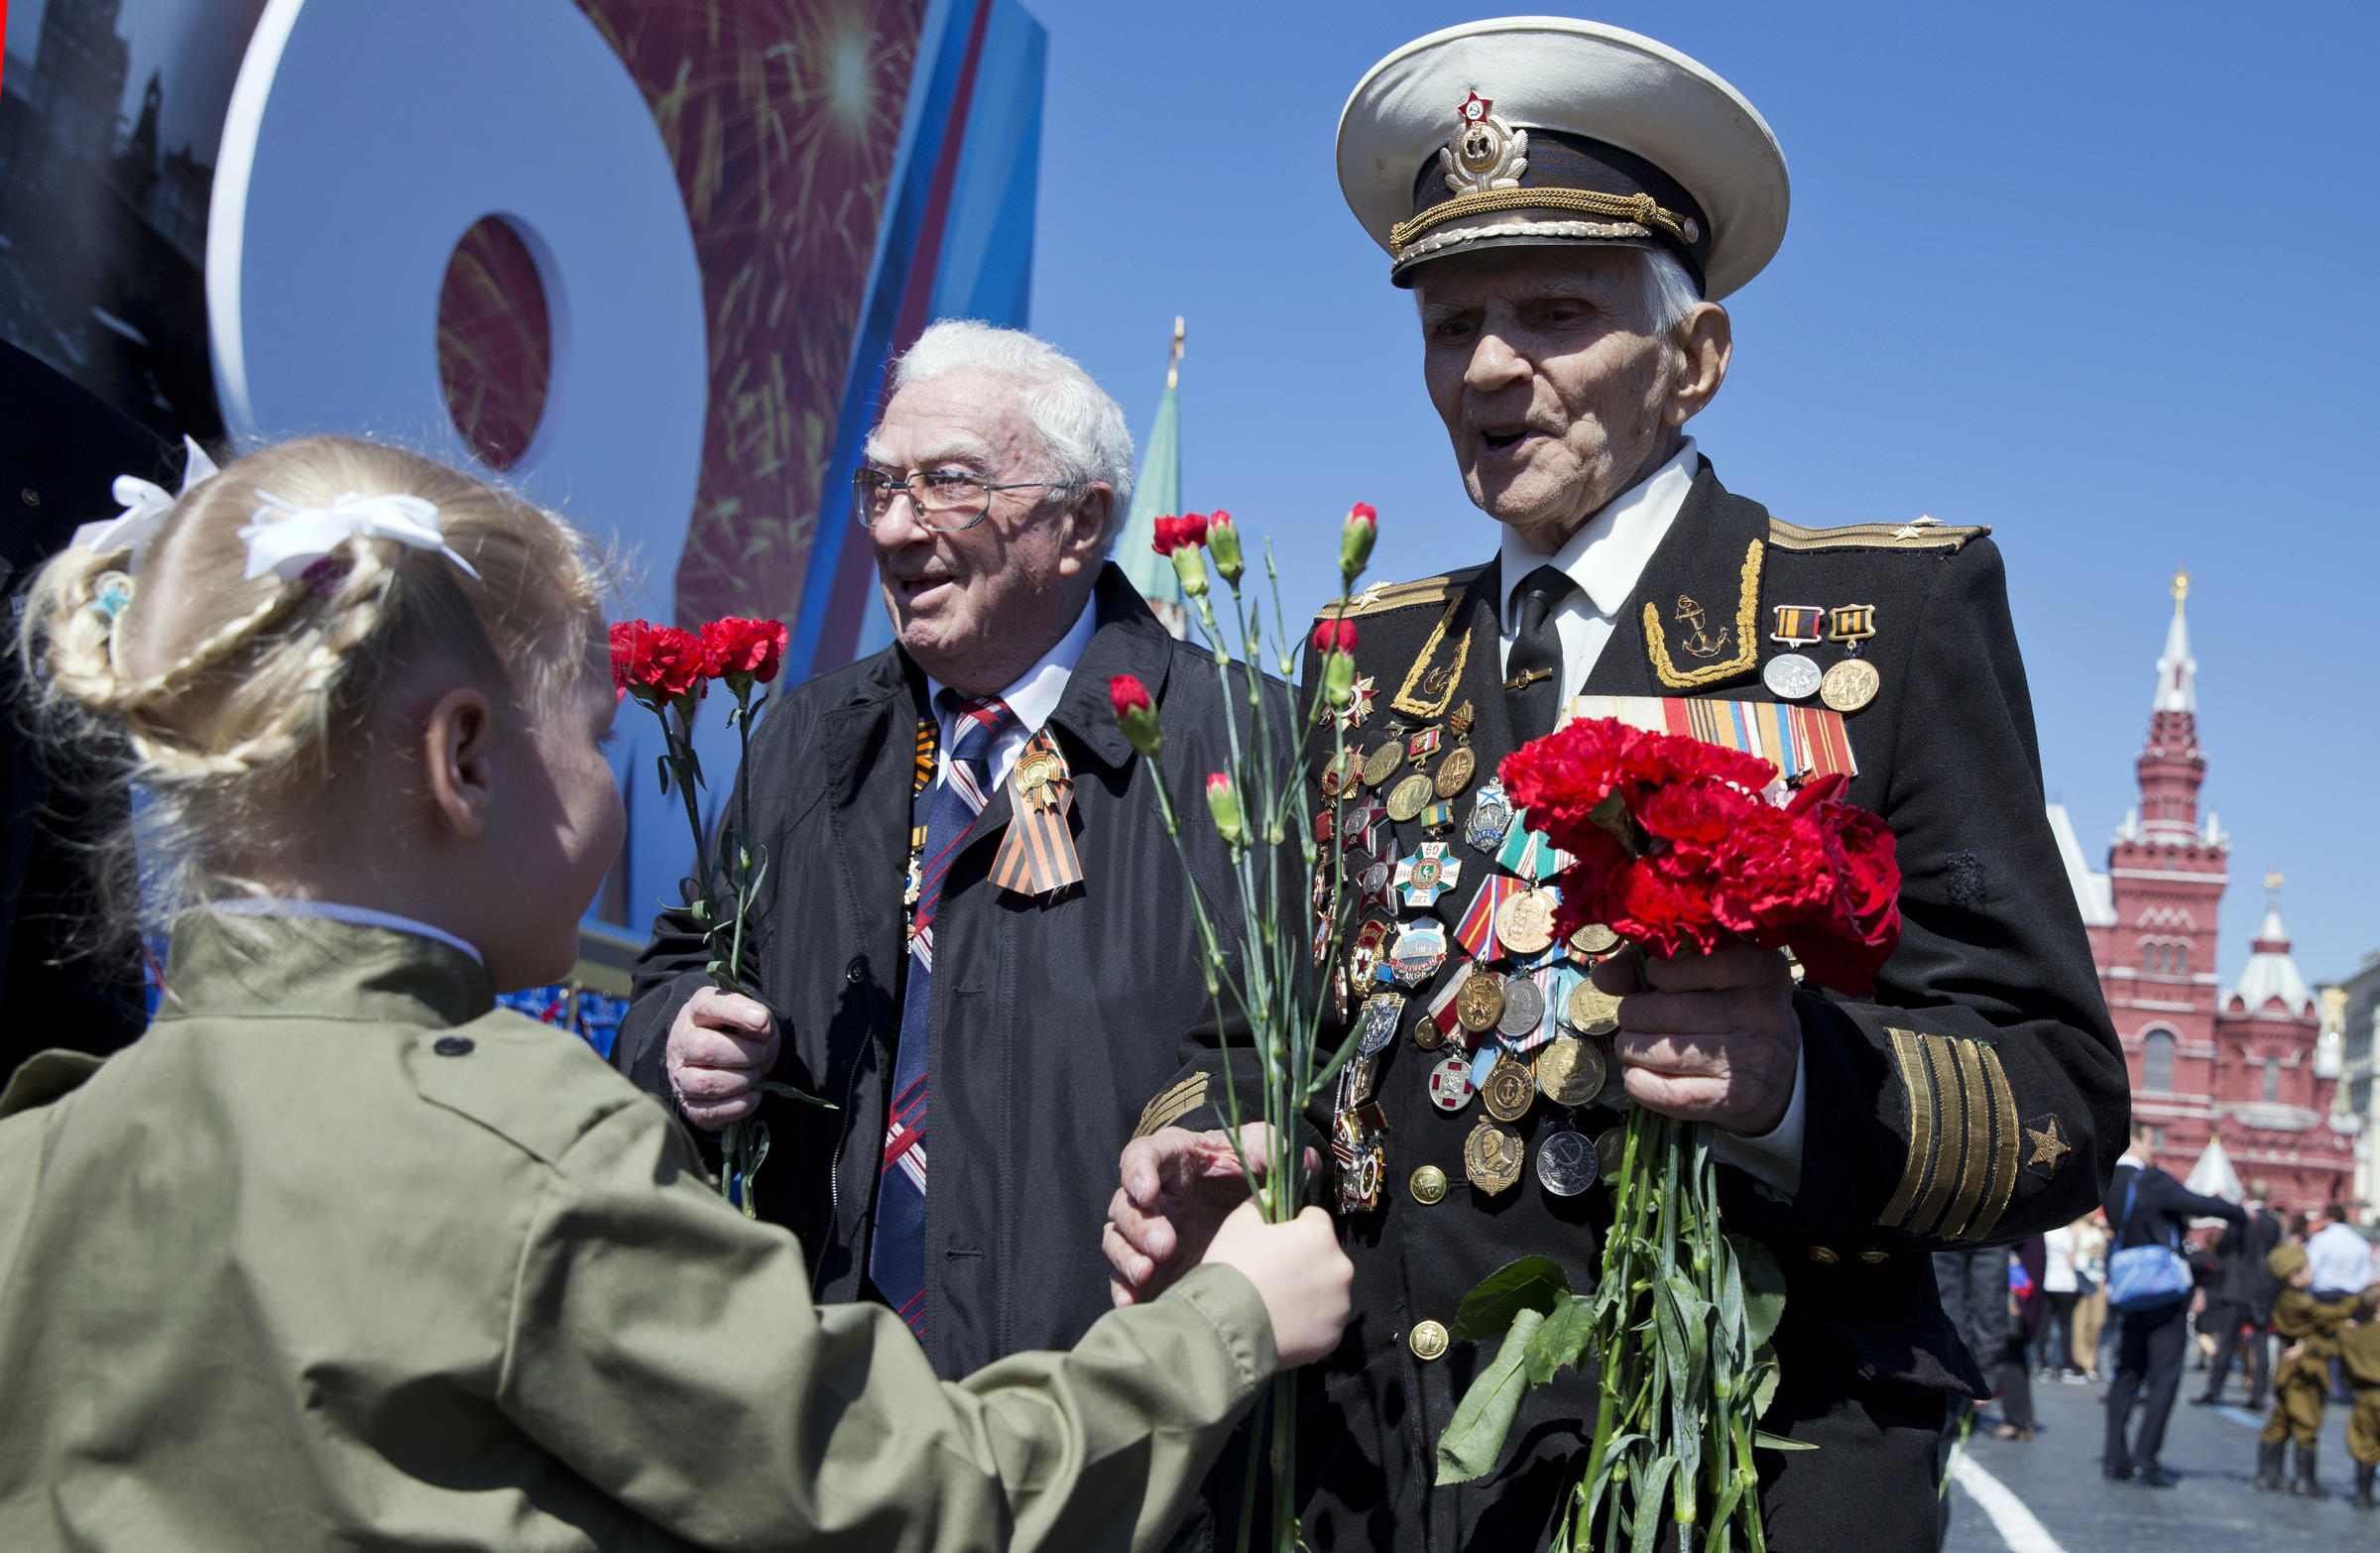 russia victory day 2012